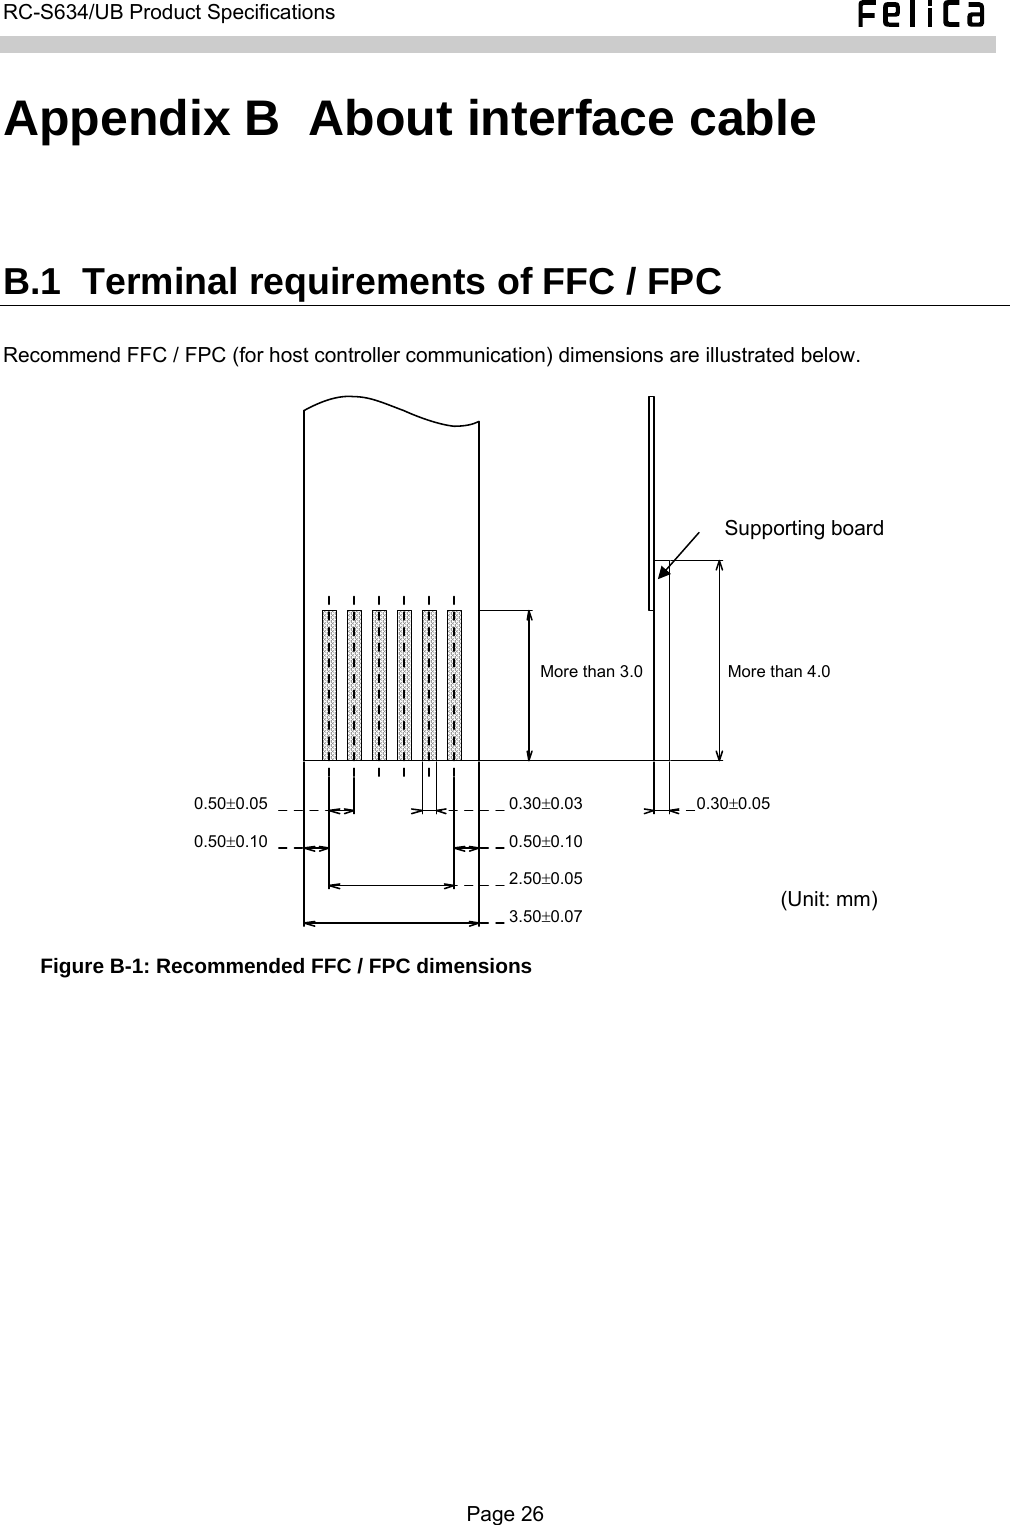   RC-S634/UB Product Specifications  Appendix B  About interface cable B.1  Terminal requirements of FFC / FPC Recommend FFC / FPC (for host controller communication) dimensions are illustrated below.  Figure B-1: Recommended FFC / FPC dimensions  (Unit: mm) Supporting board 3.50±0.07 2.50±0.05 0.50±0.10 0.50±0.100.50±0.05 0.30±0.03 0.30±0.05 More than 4.0 More than 3.0 Page 26  